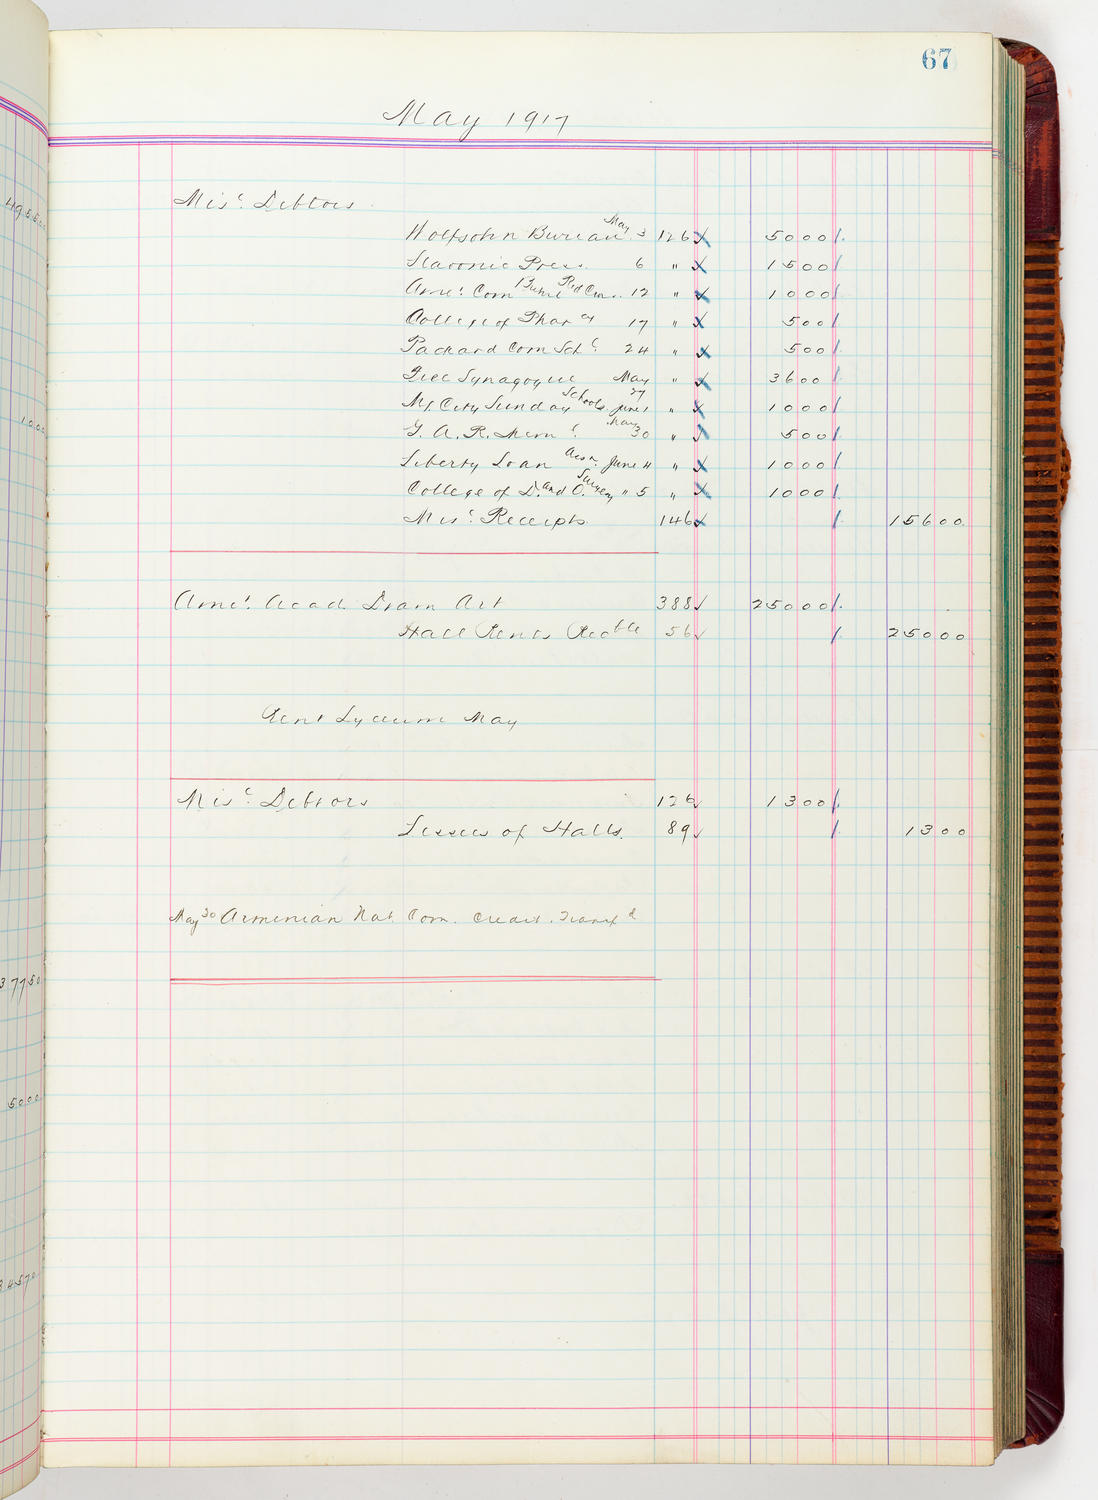 Music Hall Accounting Ledger, volume 5, page 67